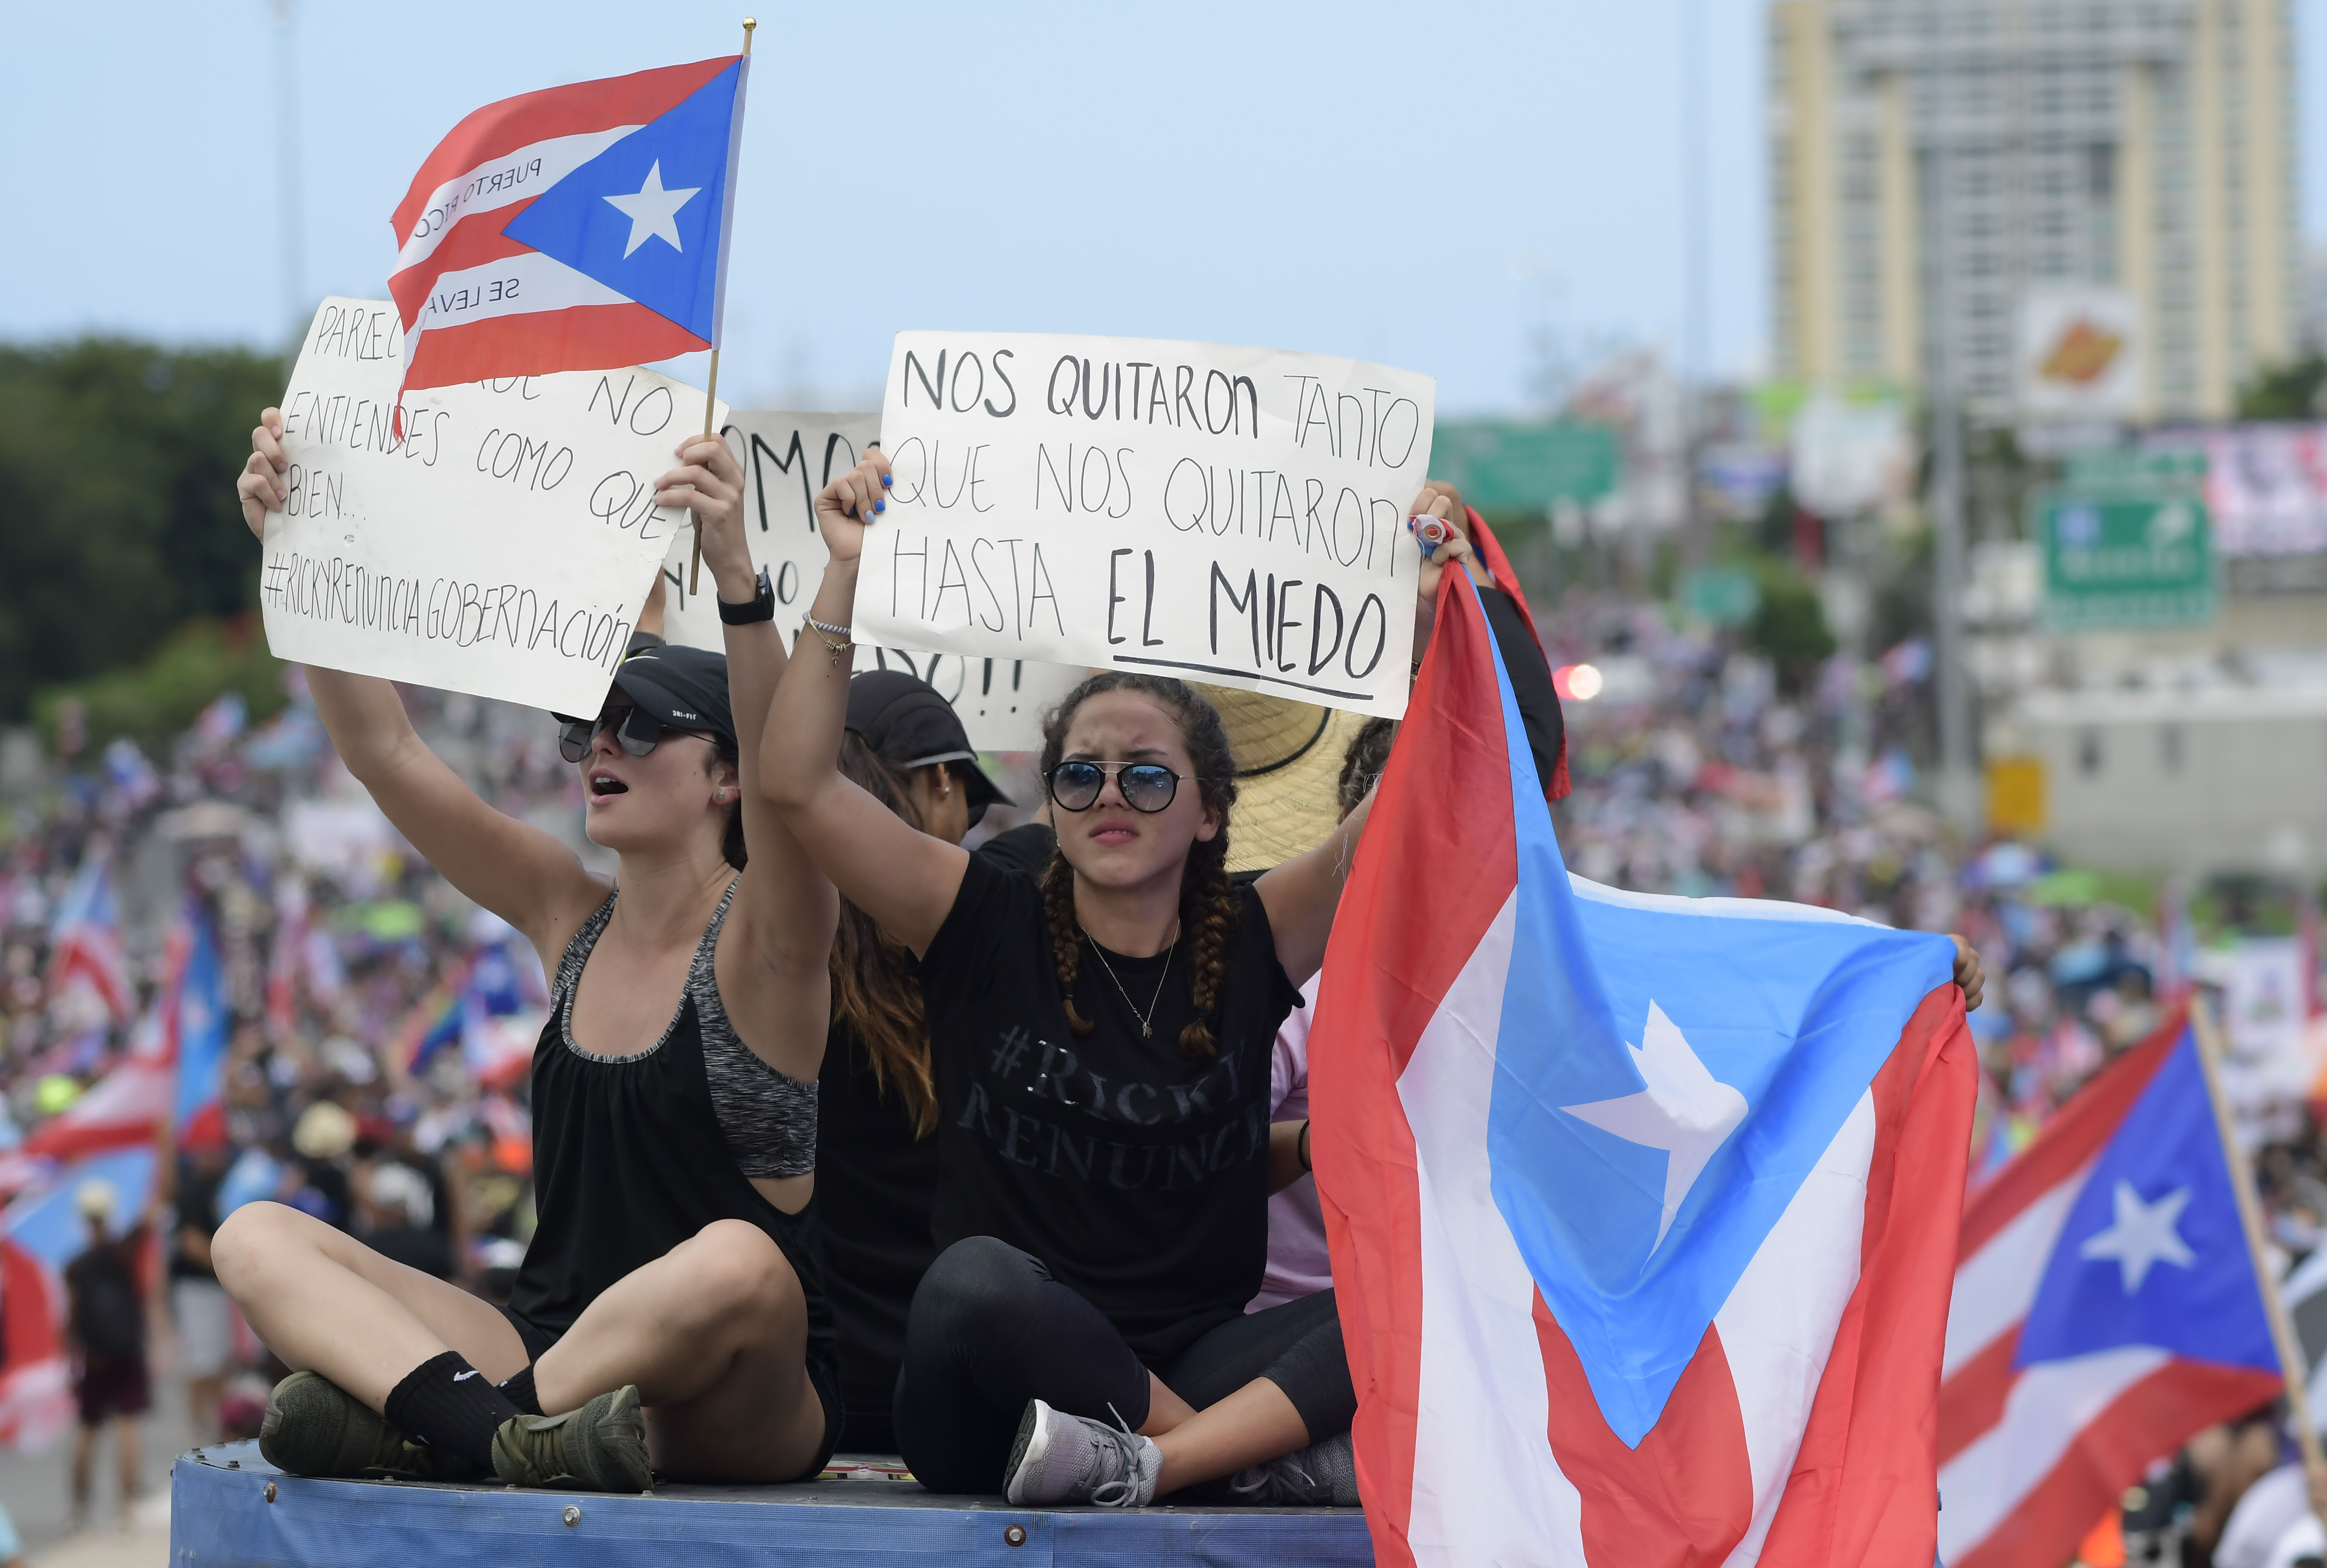 Demonstrators protest demanding the resignation of governor Ricardo Rossello in San Juan, Puerto Rico, Monday, July 22, 2019. Protesters are demanding Rossello step down for his involvement in a private chat in which he used profanities to describe an ex-New York City councilwoman and a federal control board overseeing the island's finance. (AP Photo/Carlos Giusti)